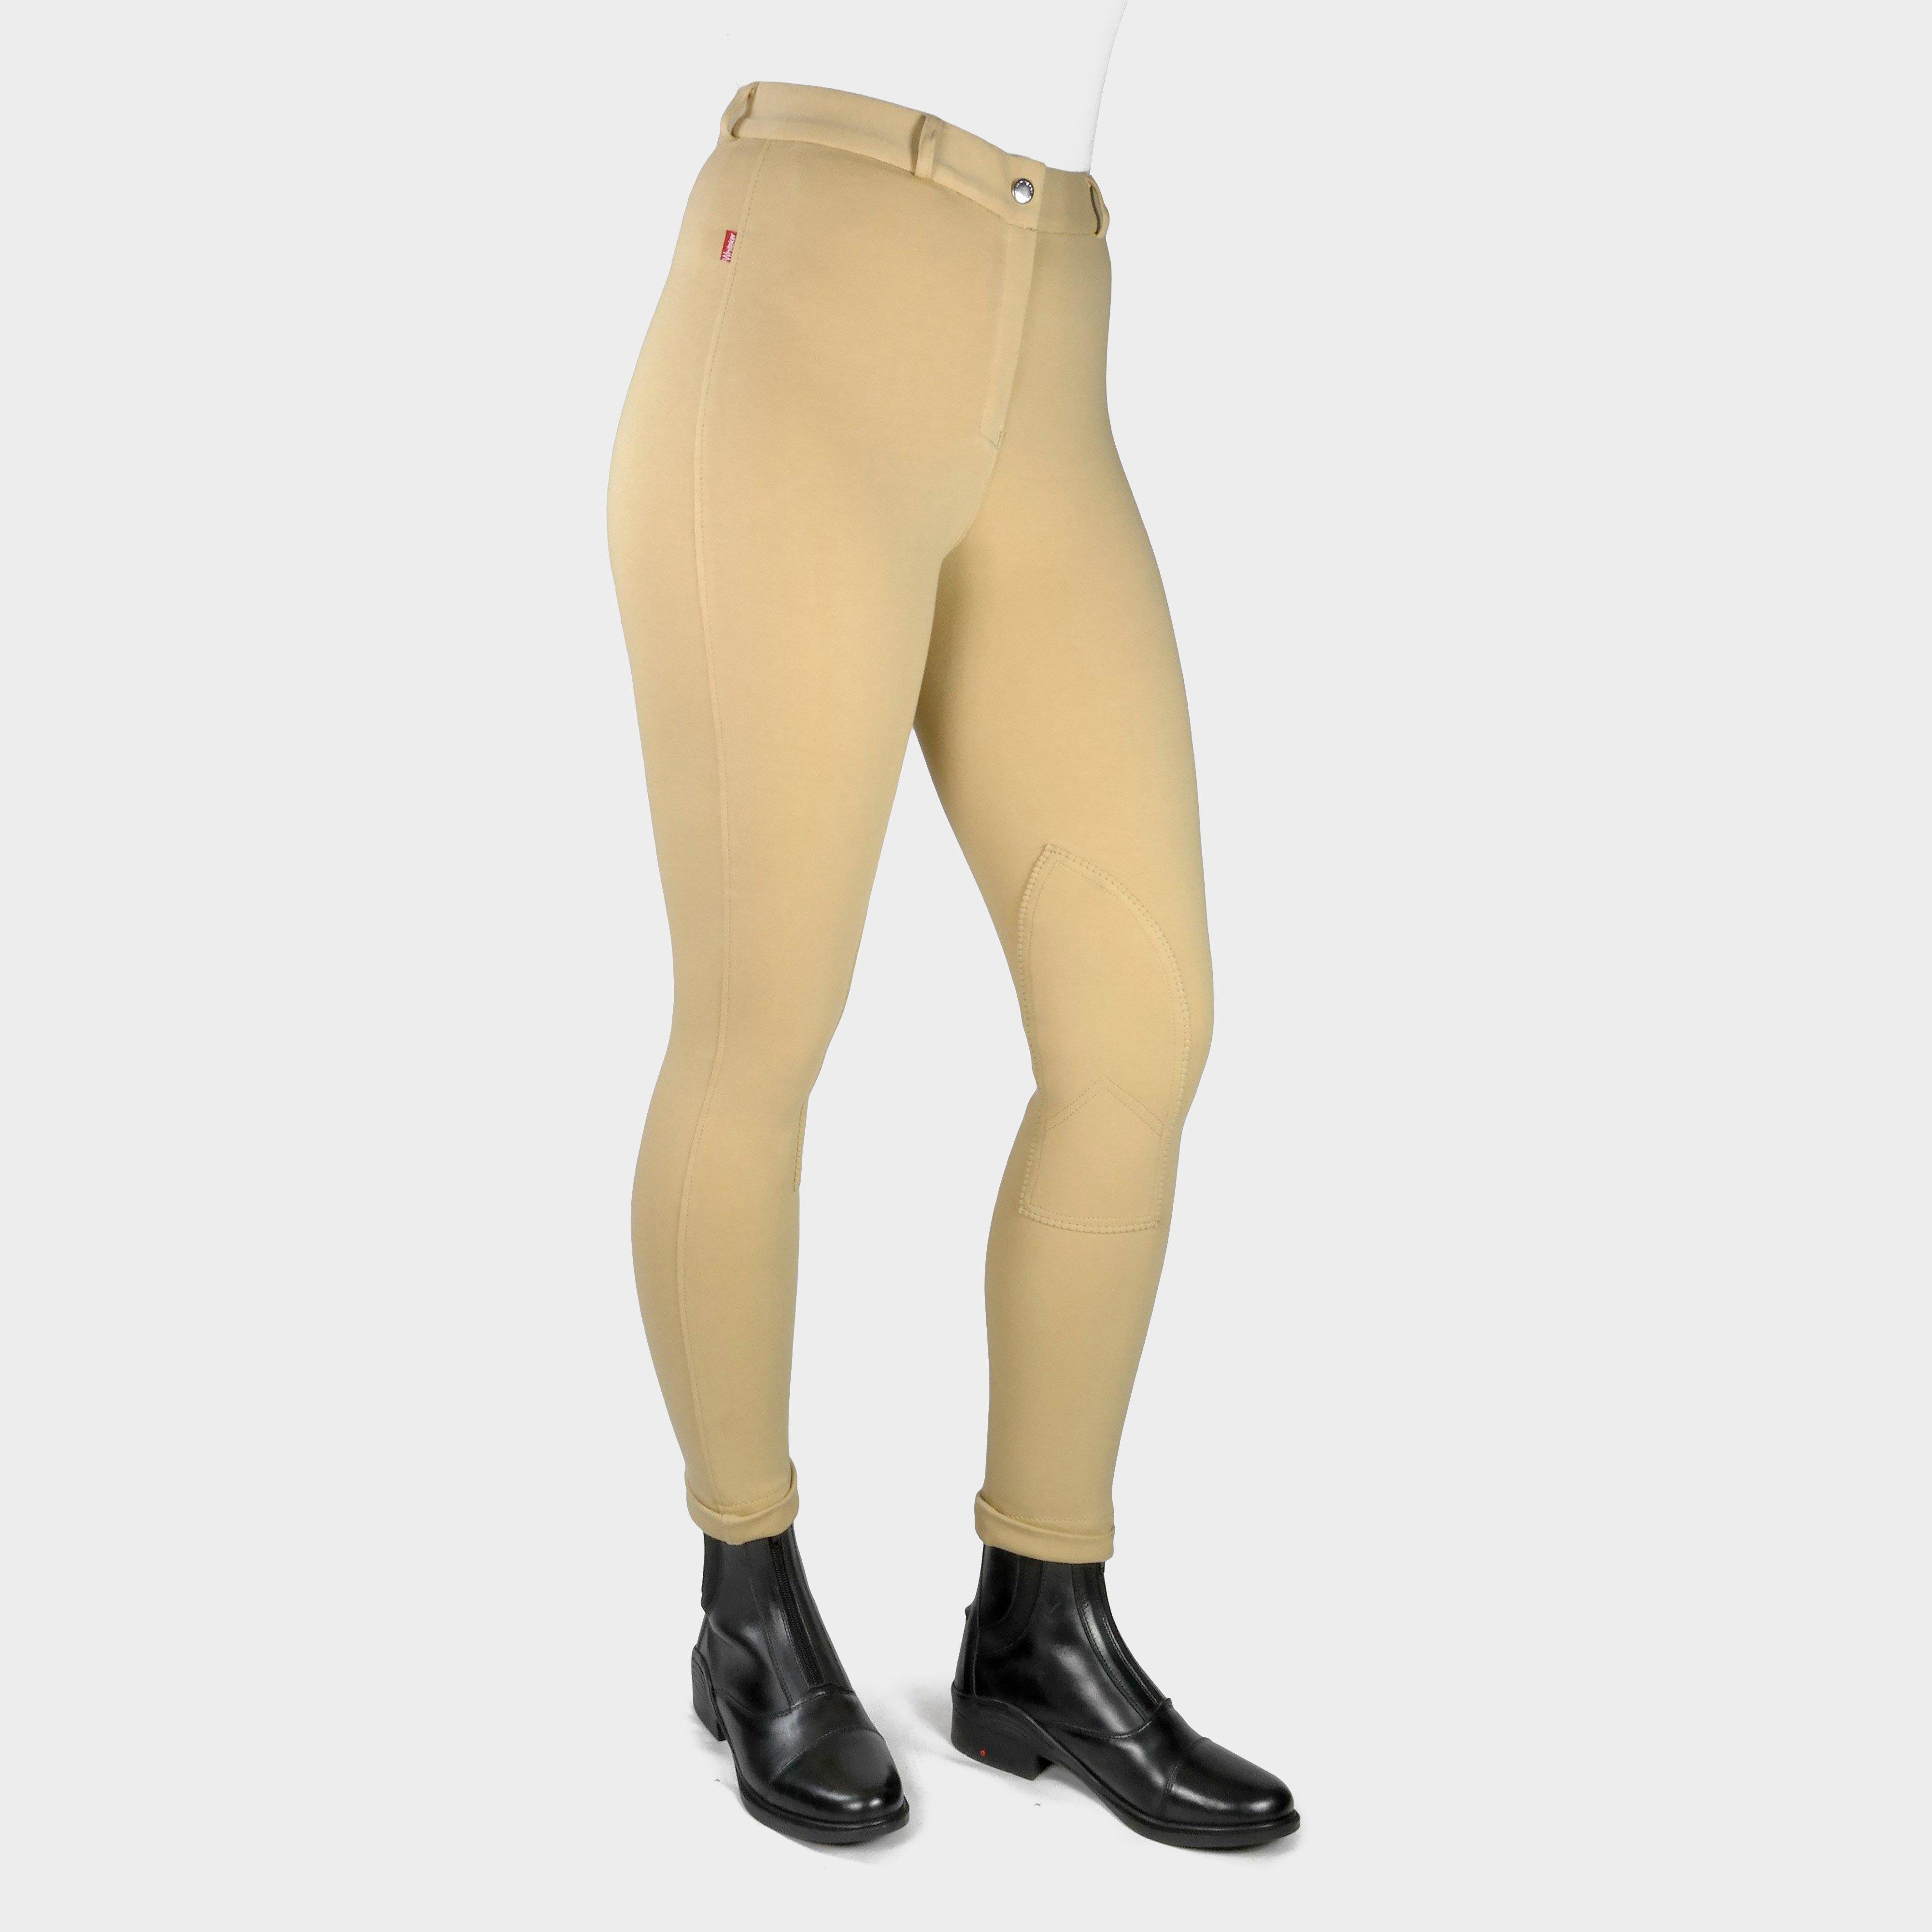 Shires Aubrion Women’s Albany Riding Tights Review